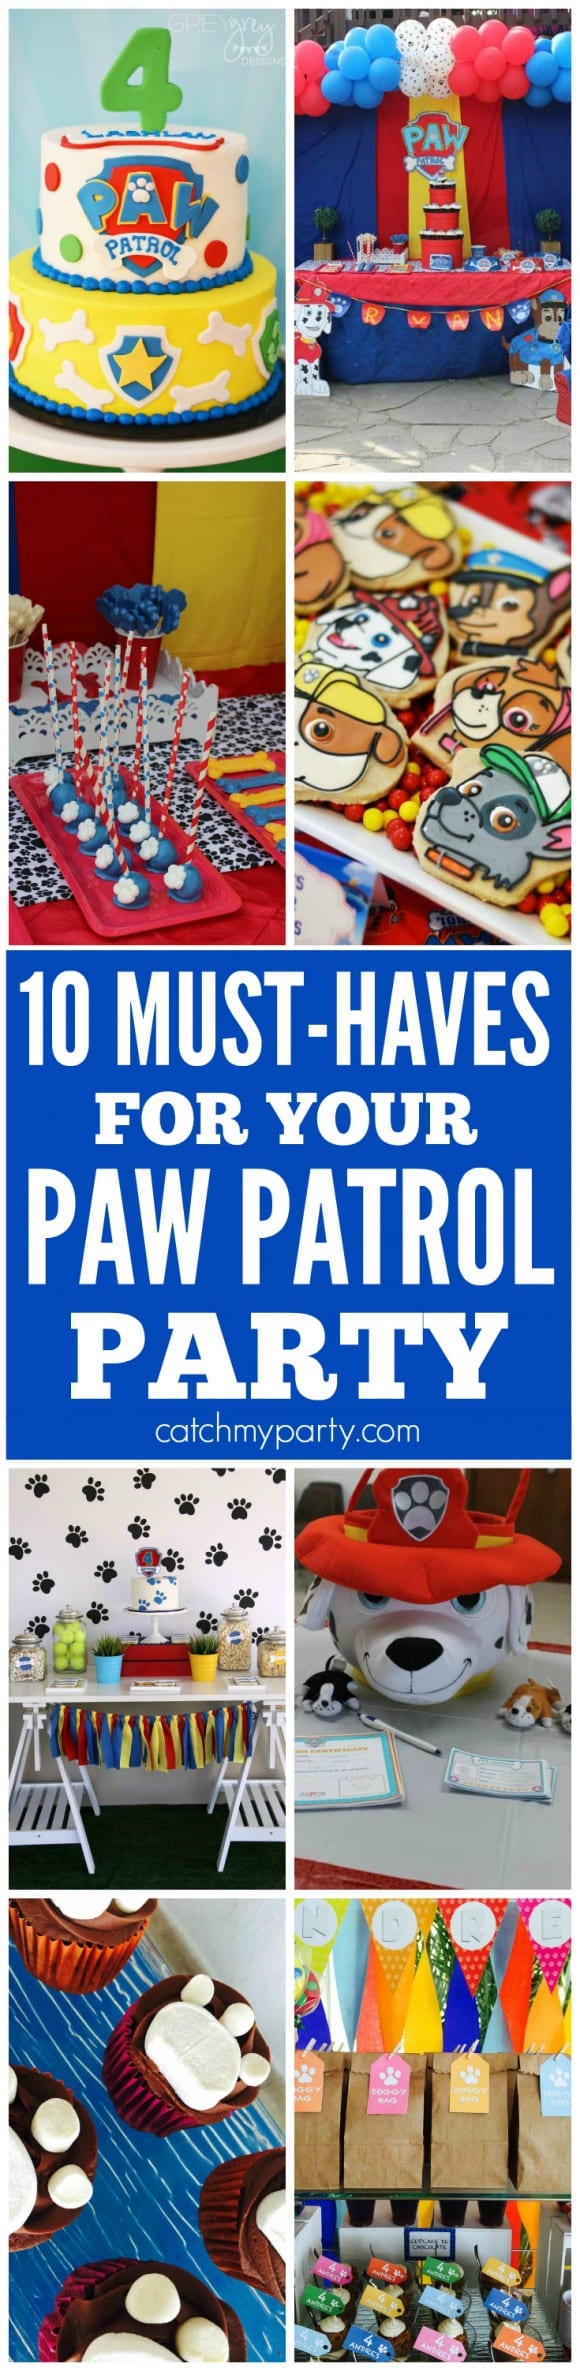 10 Must-Haves for your Paw Patrol party | CatchMyParty.com